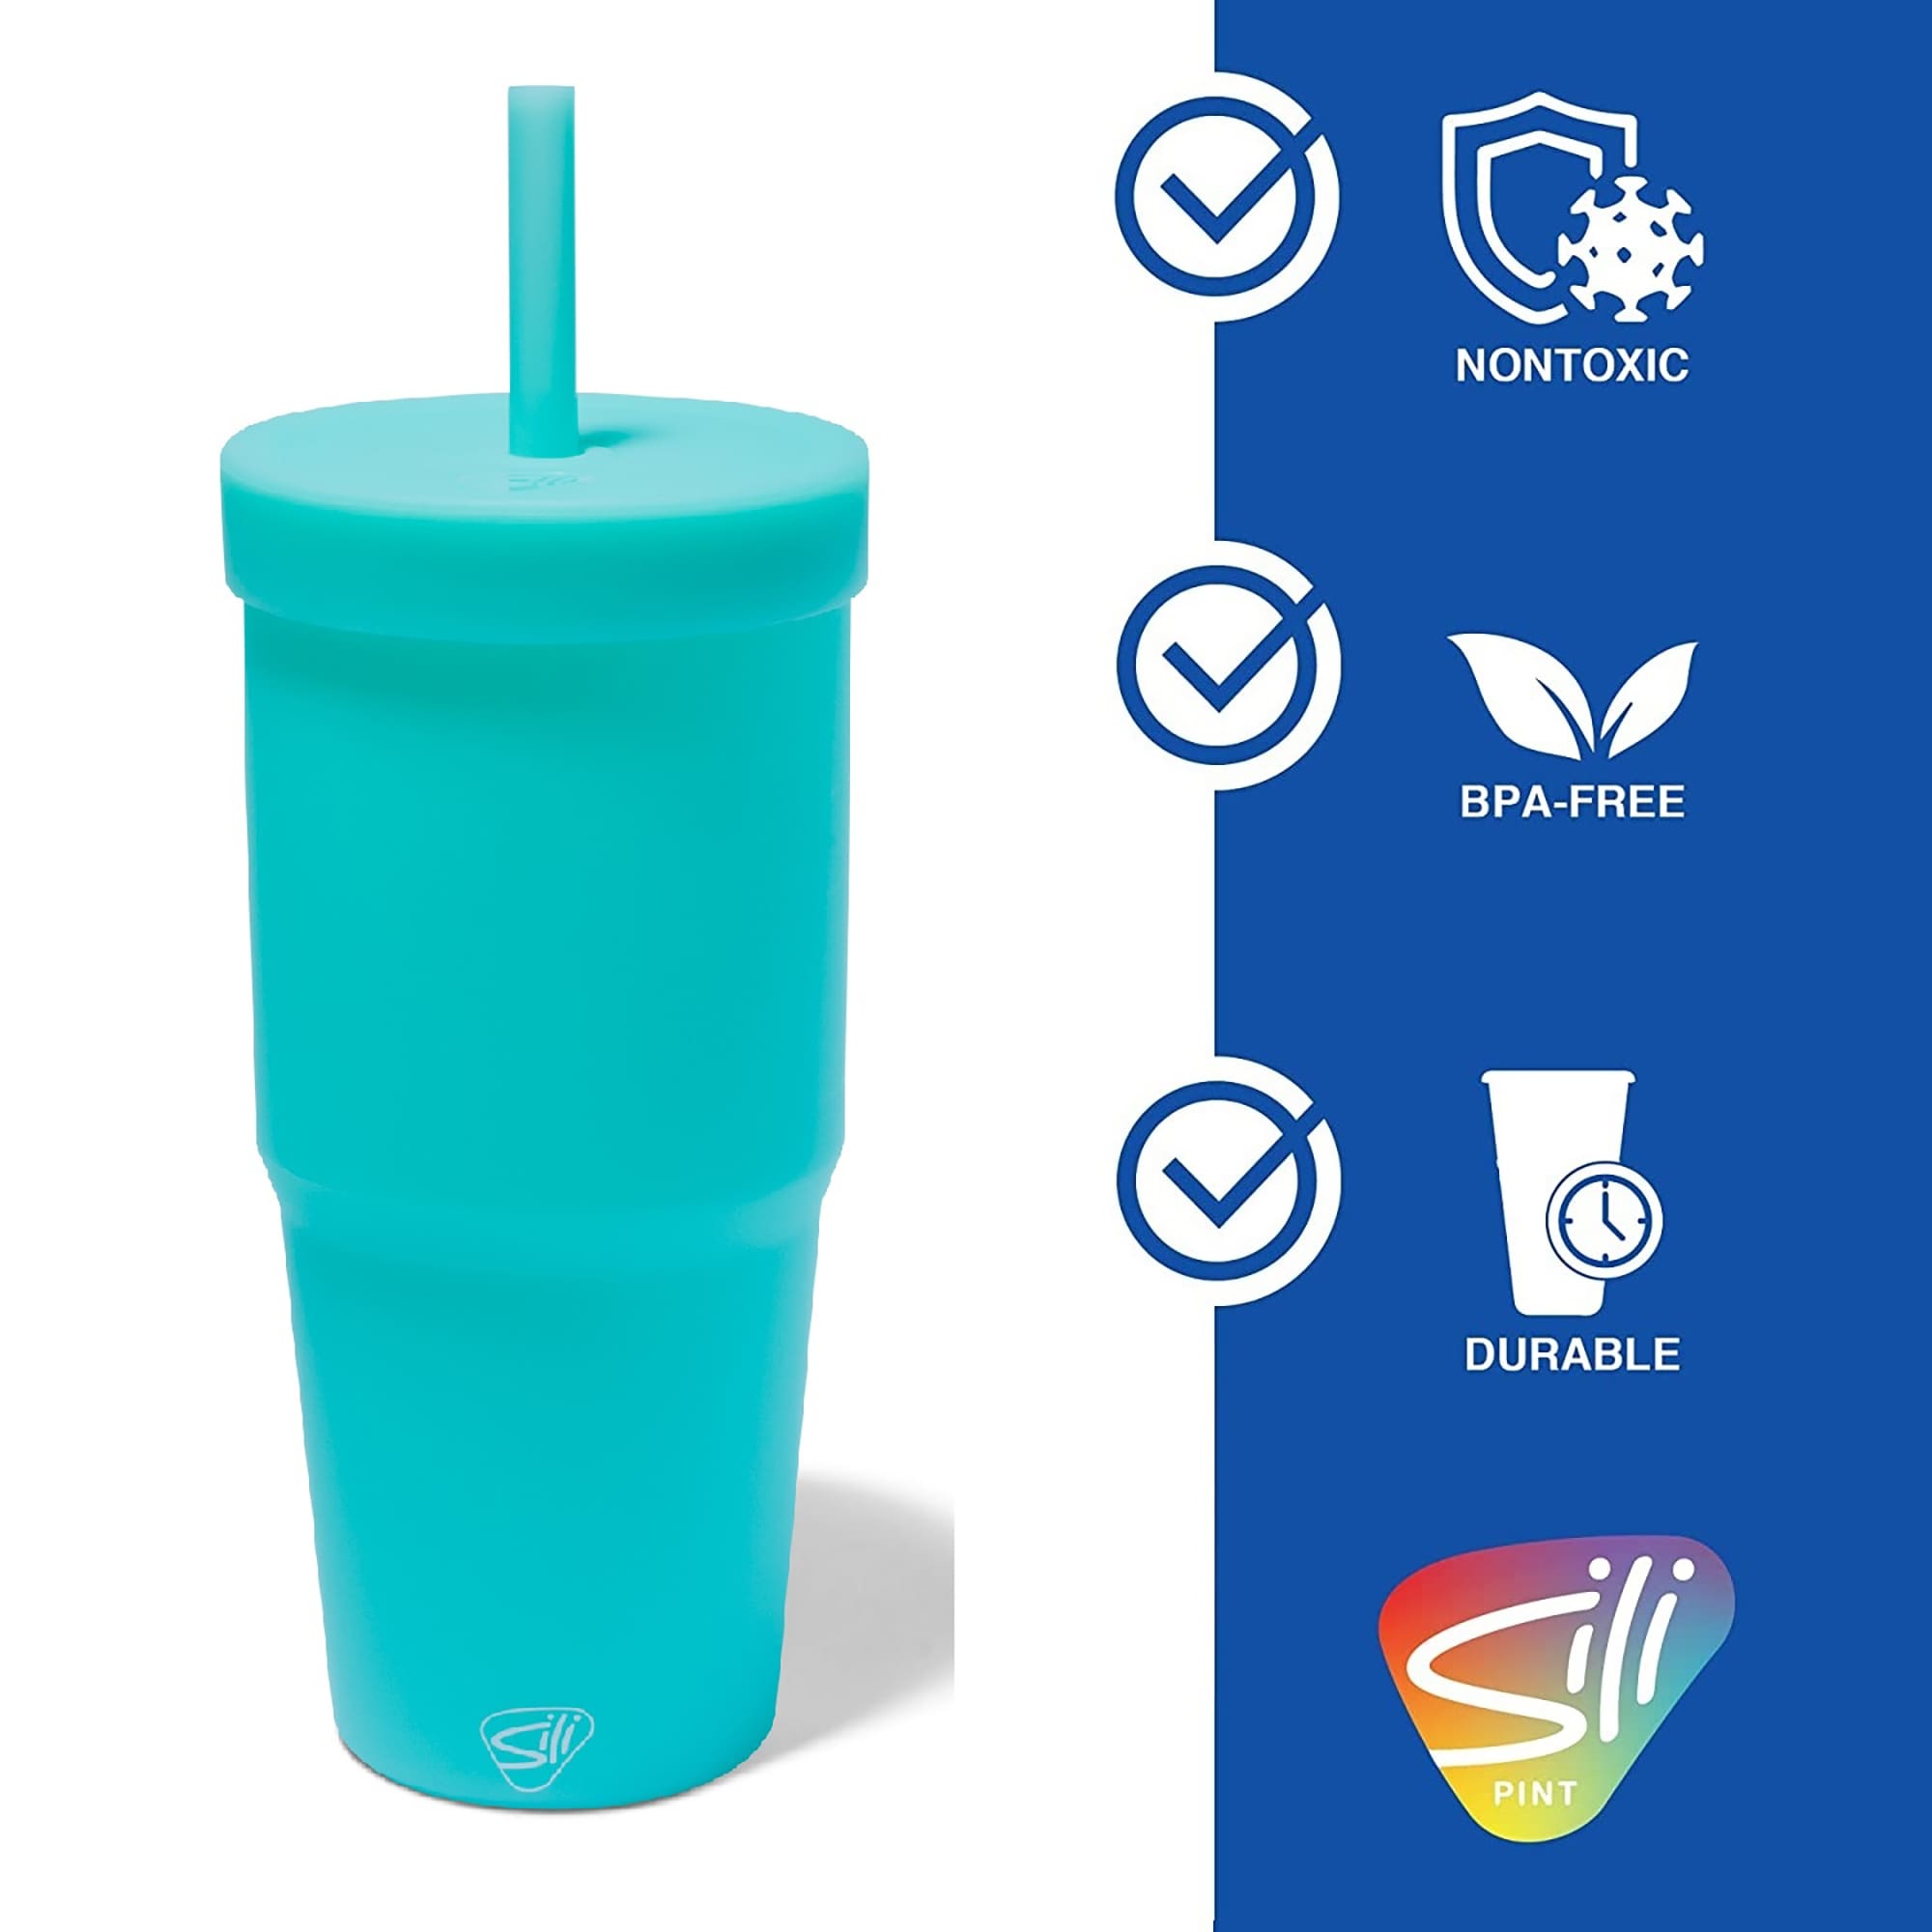 https://ak1.ostkcdn.com/images/products/is/images/direct/004de586f27aee4e1e29b1e76a95ad7e9577a8e2/Silipint%3A-Silicone-32oz-Straw-Tumblers%3A-2-Pack--Aqua-%26-Sugar-Rush---Unbreakable-Cup%2C-Flexible%2C-Hot-Cold%2C-Airtight-Lid.jpg